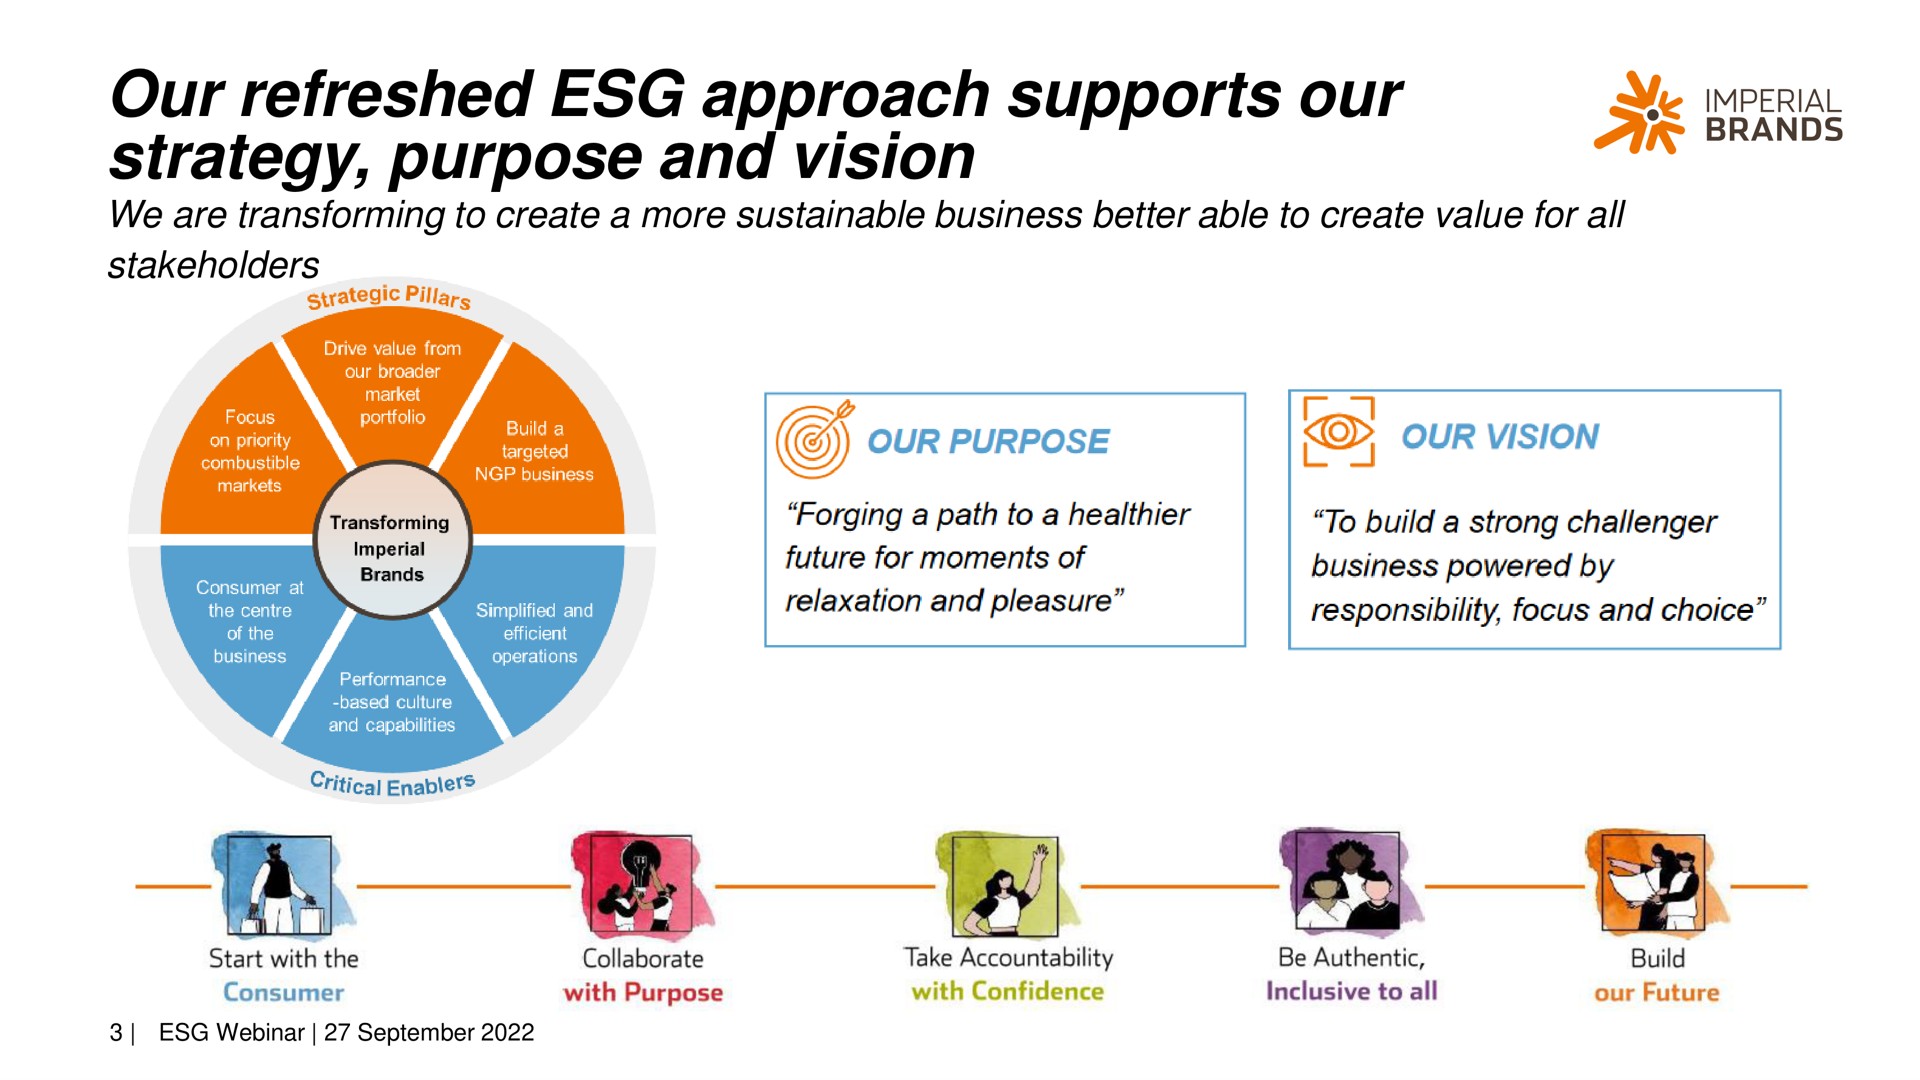 our refreshed approach supports our strategy purpose and vision me imperial | Imperial Brands